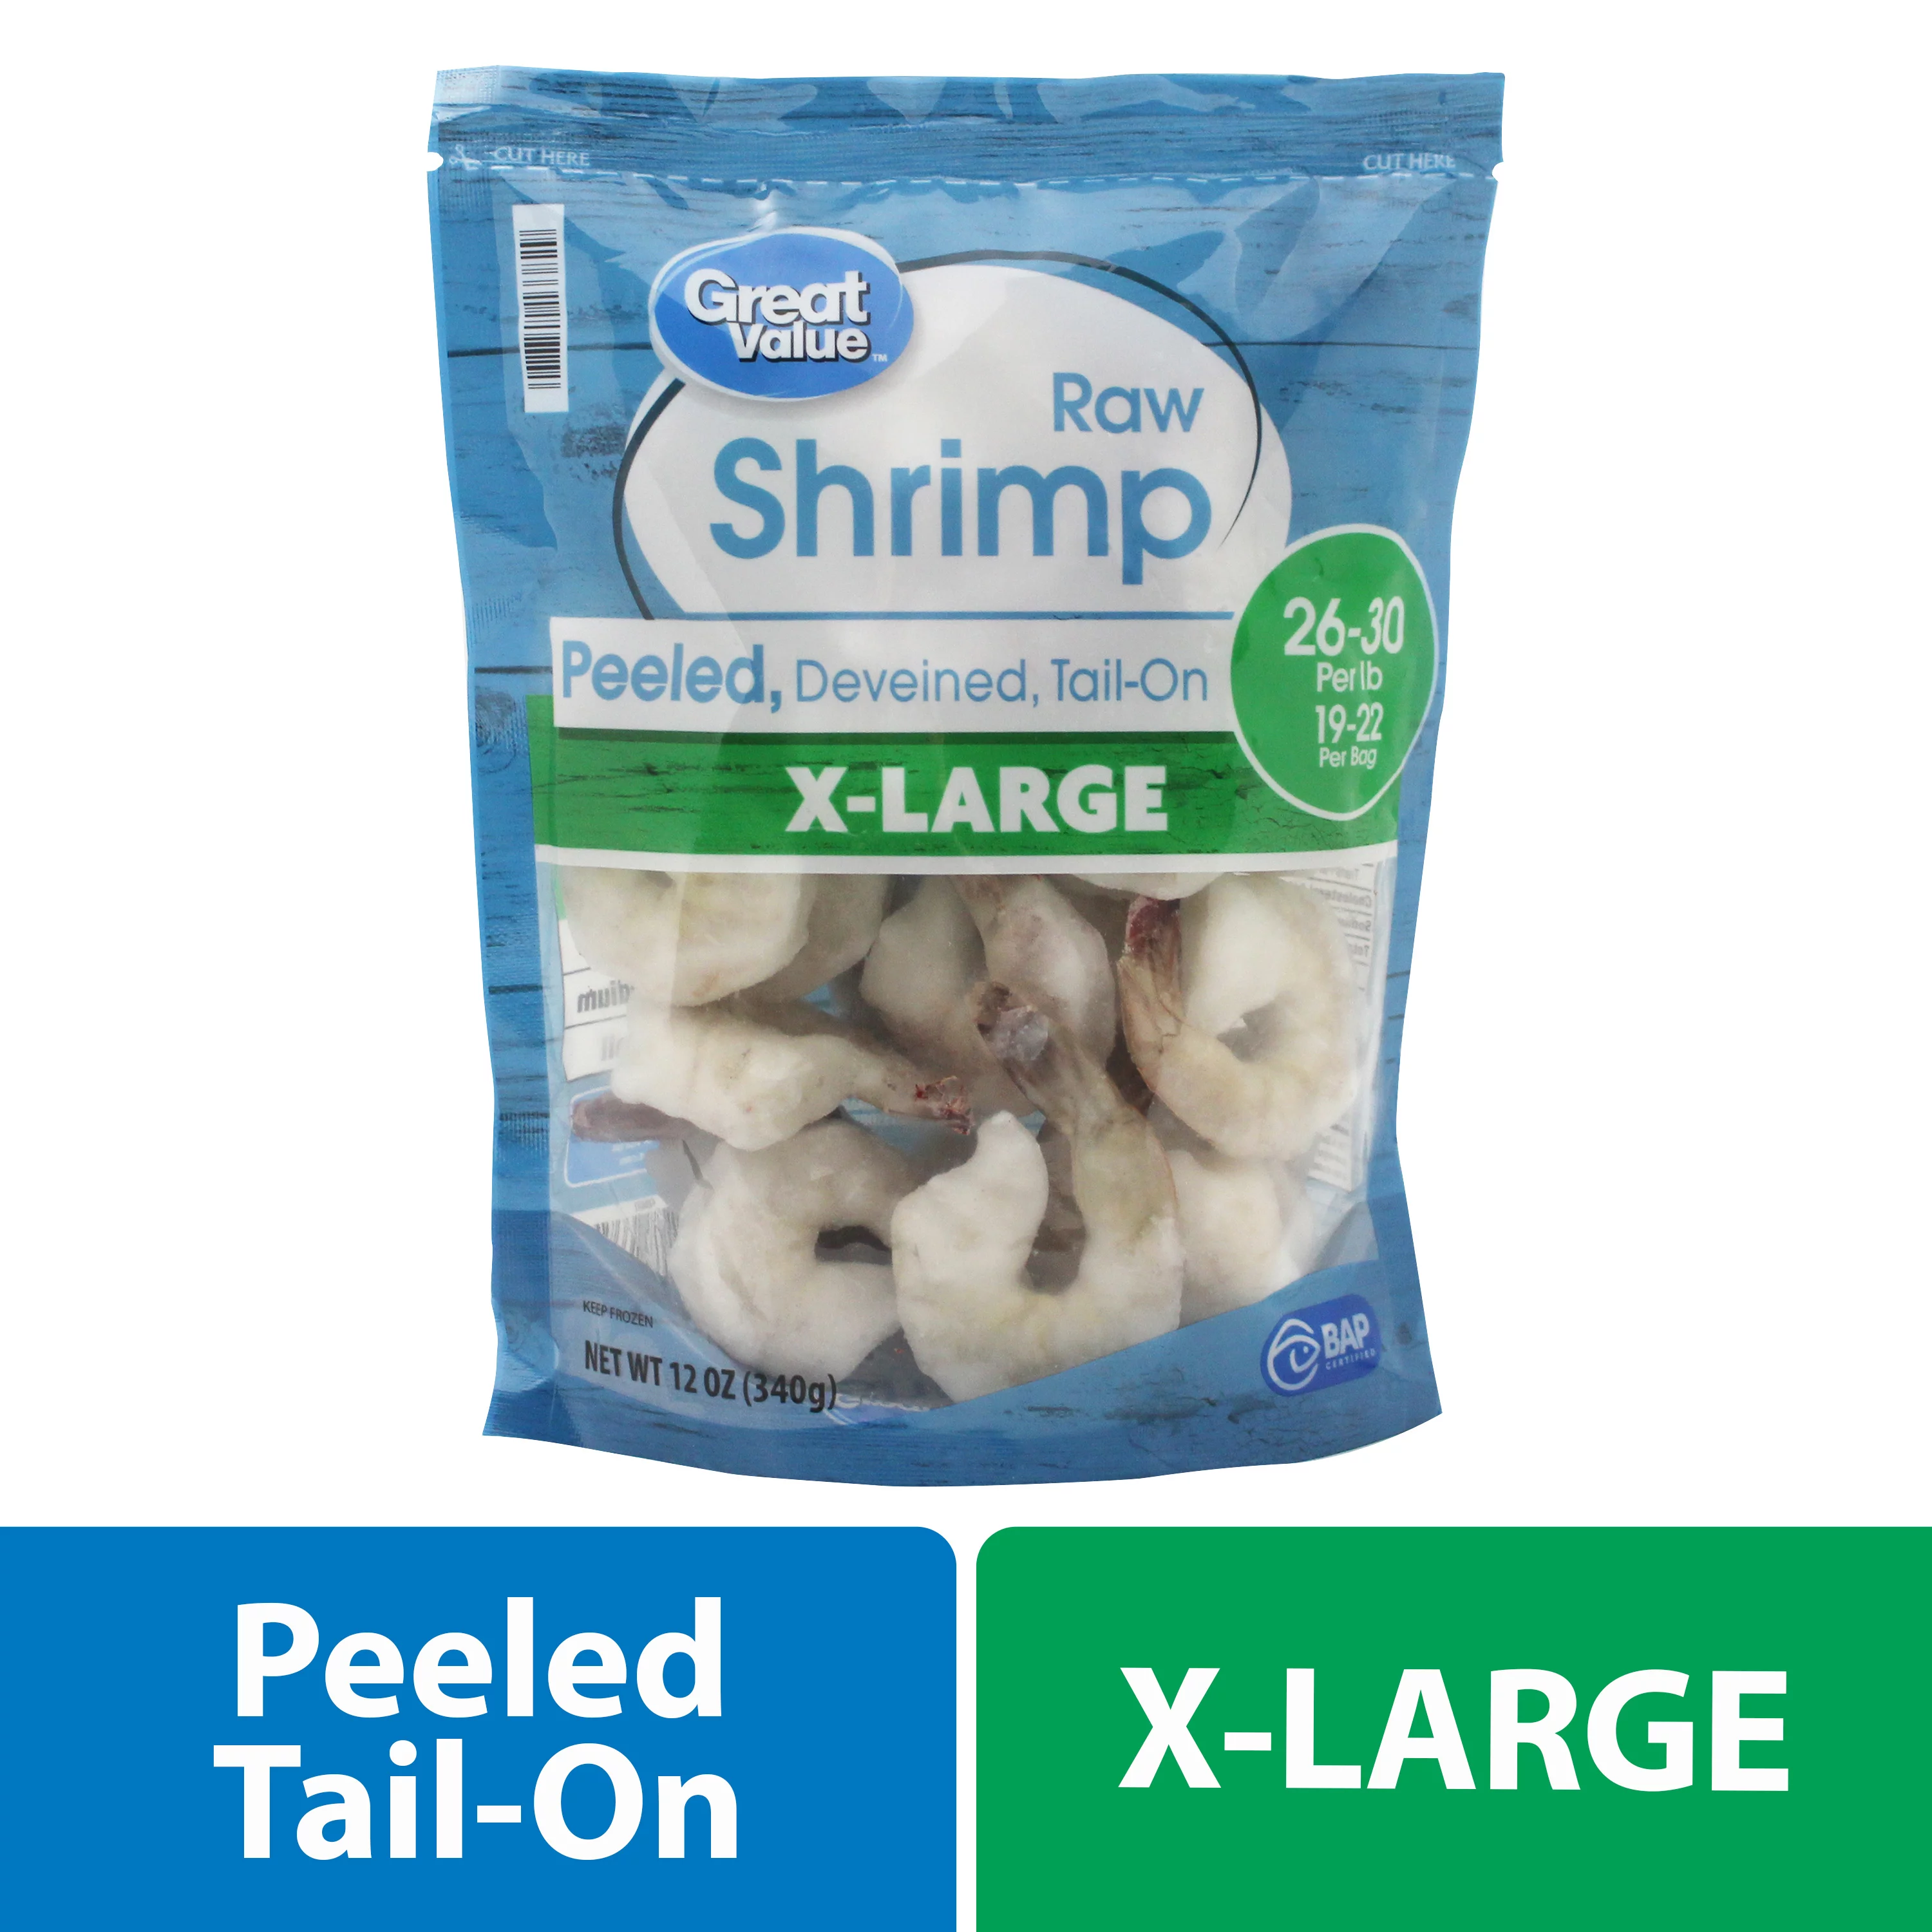 Great Value Frozen Peeled Tail on Extra Large Shrimp, 12 oz (26-30 Count per lb)